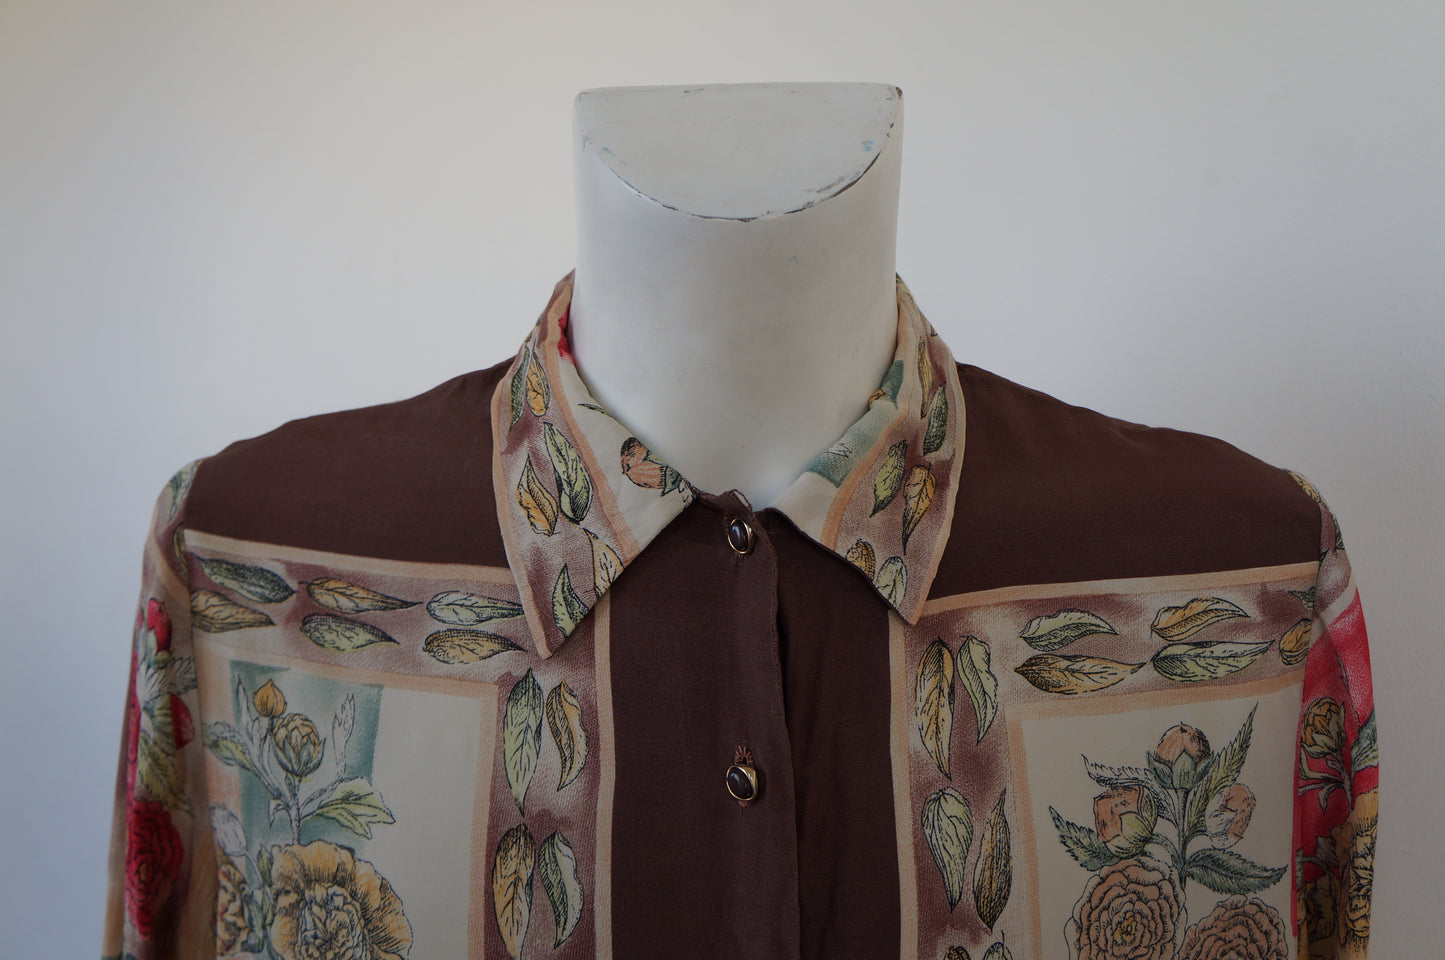 Floral tapestry shirt